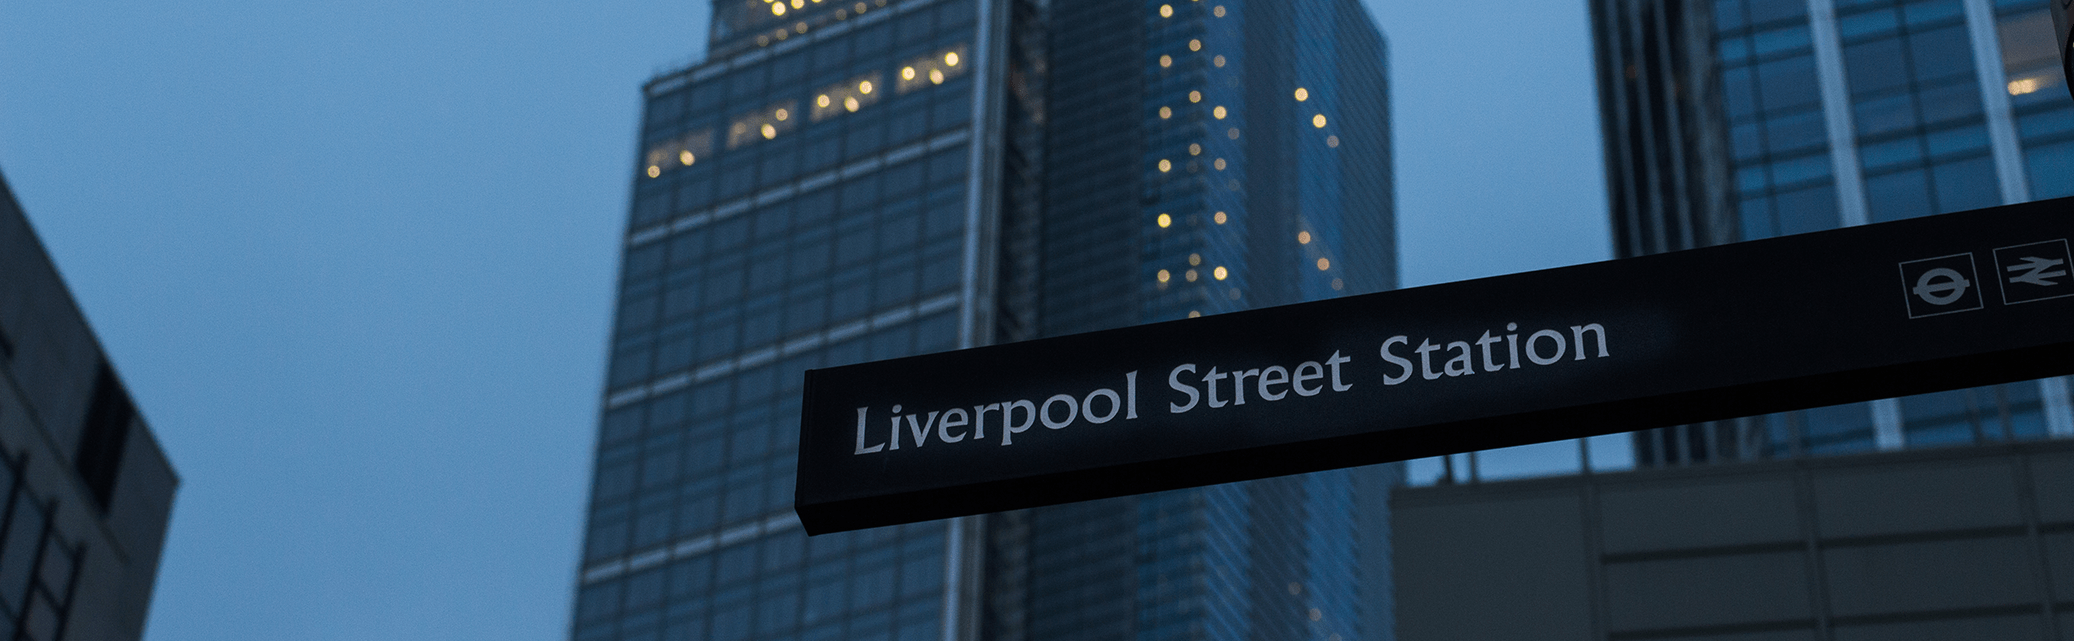 Liverpool street station sign and surrounding buildings